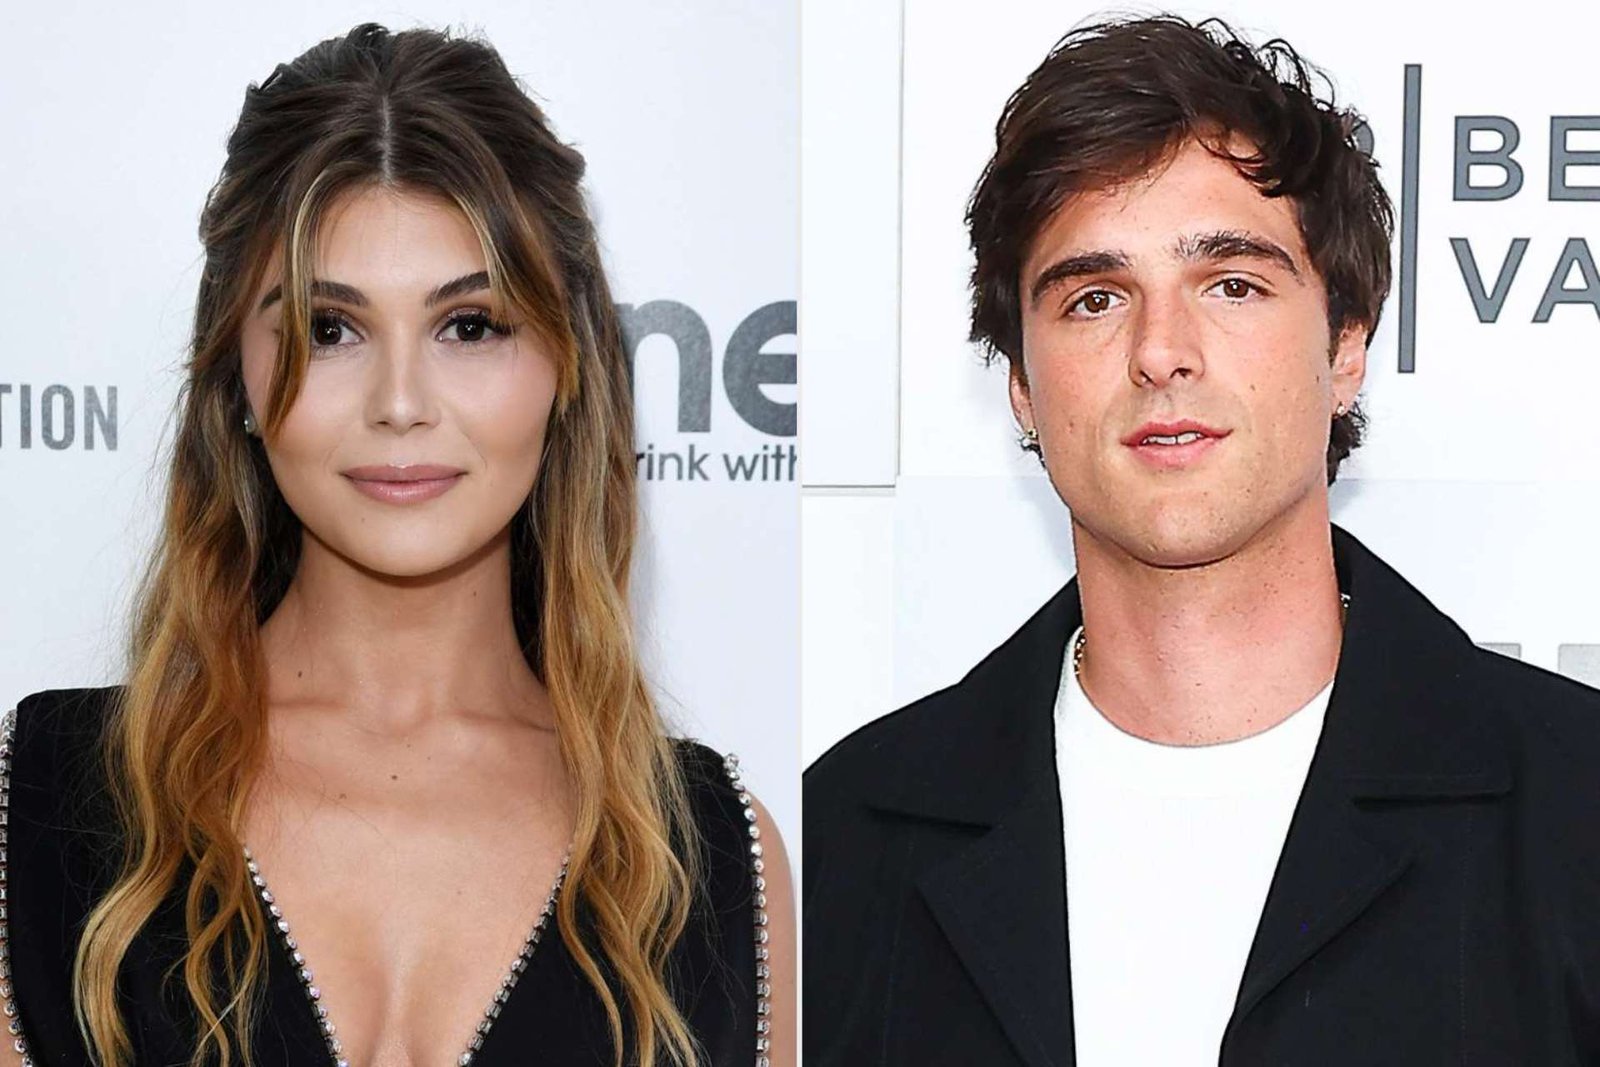 On-and-Off Again: Jacob Elordi and Olivia Jade Giannulli Call It Quits Once More